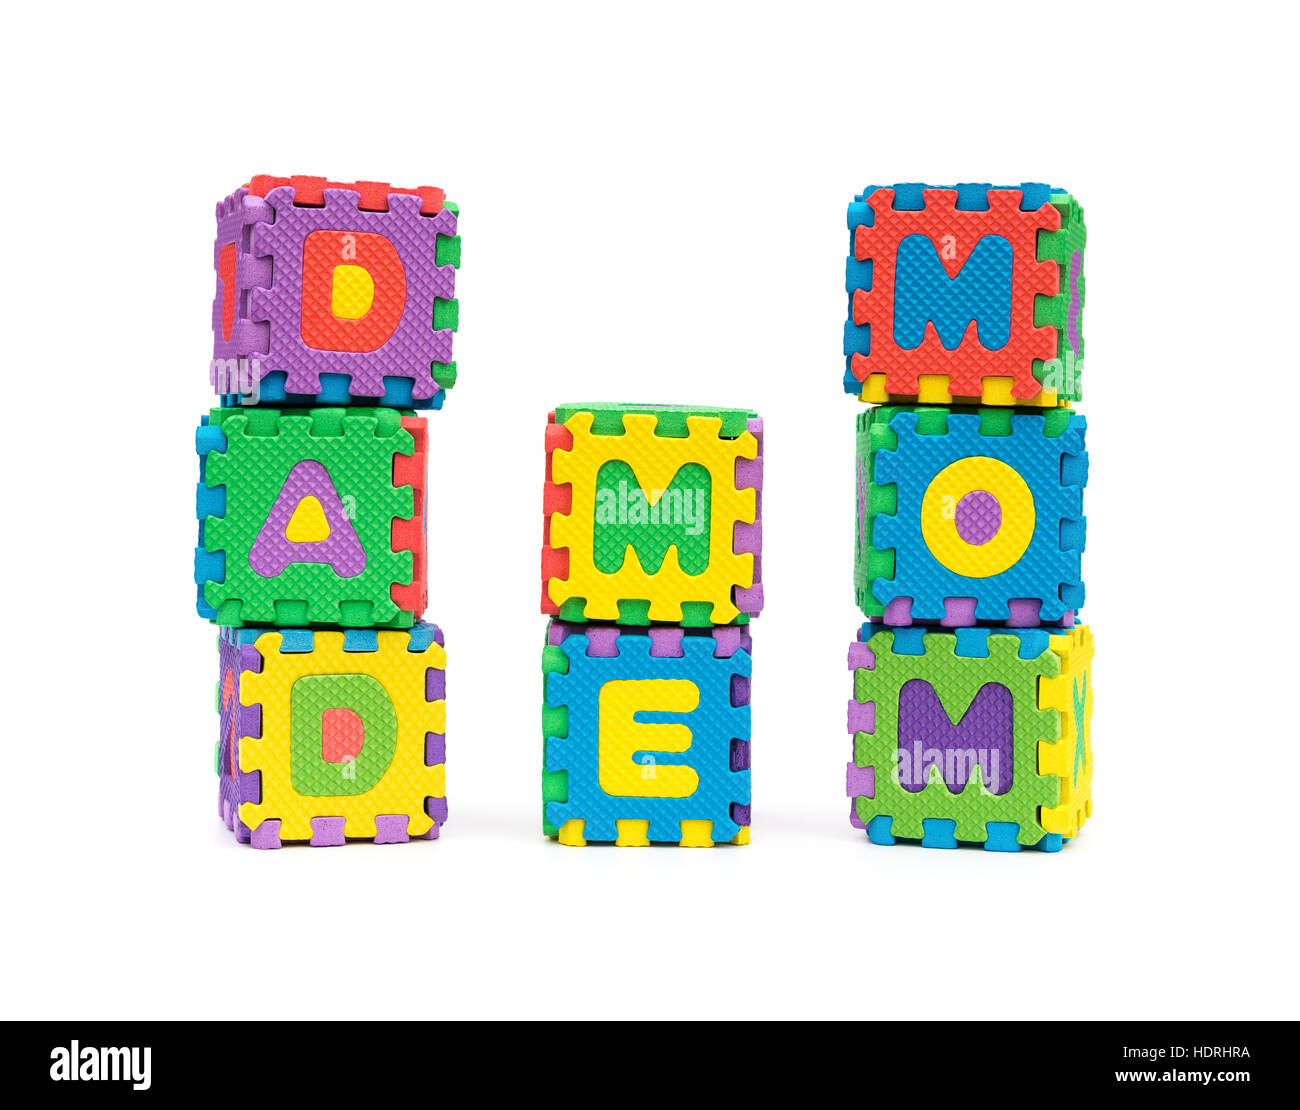 DAD ME MOM shaped by alphabet jigsaw puzzle on white as concept of family Stock Photo